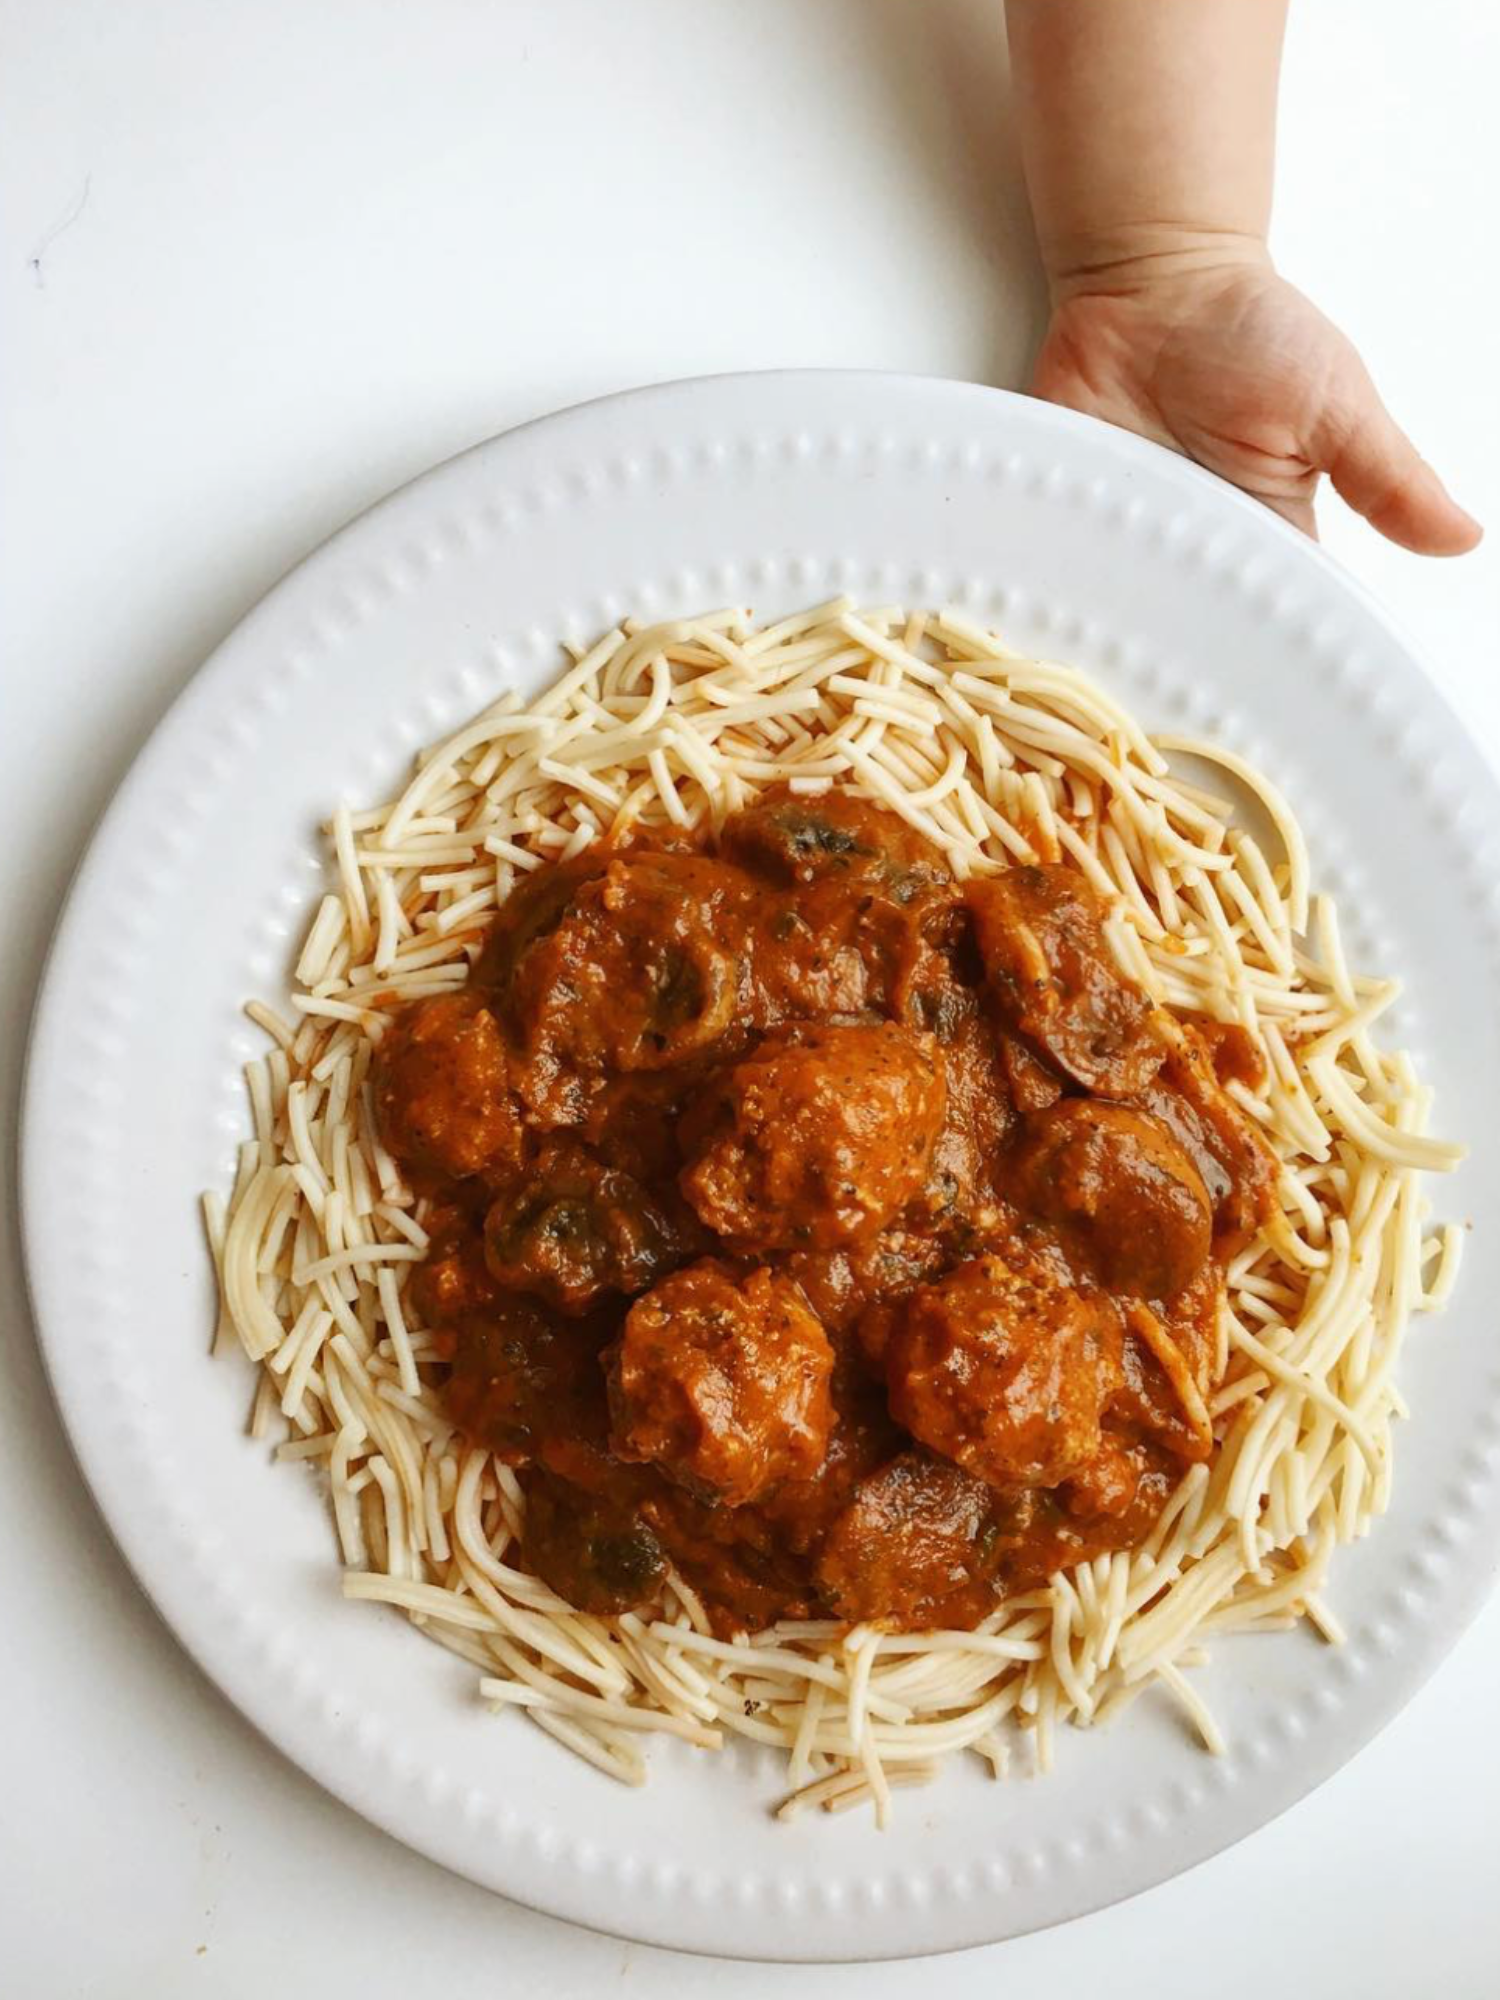 a plate of spaghetti with nomato sauce and meatballs with a childs hand holding the plate out